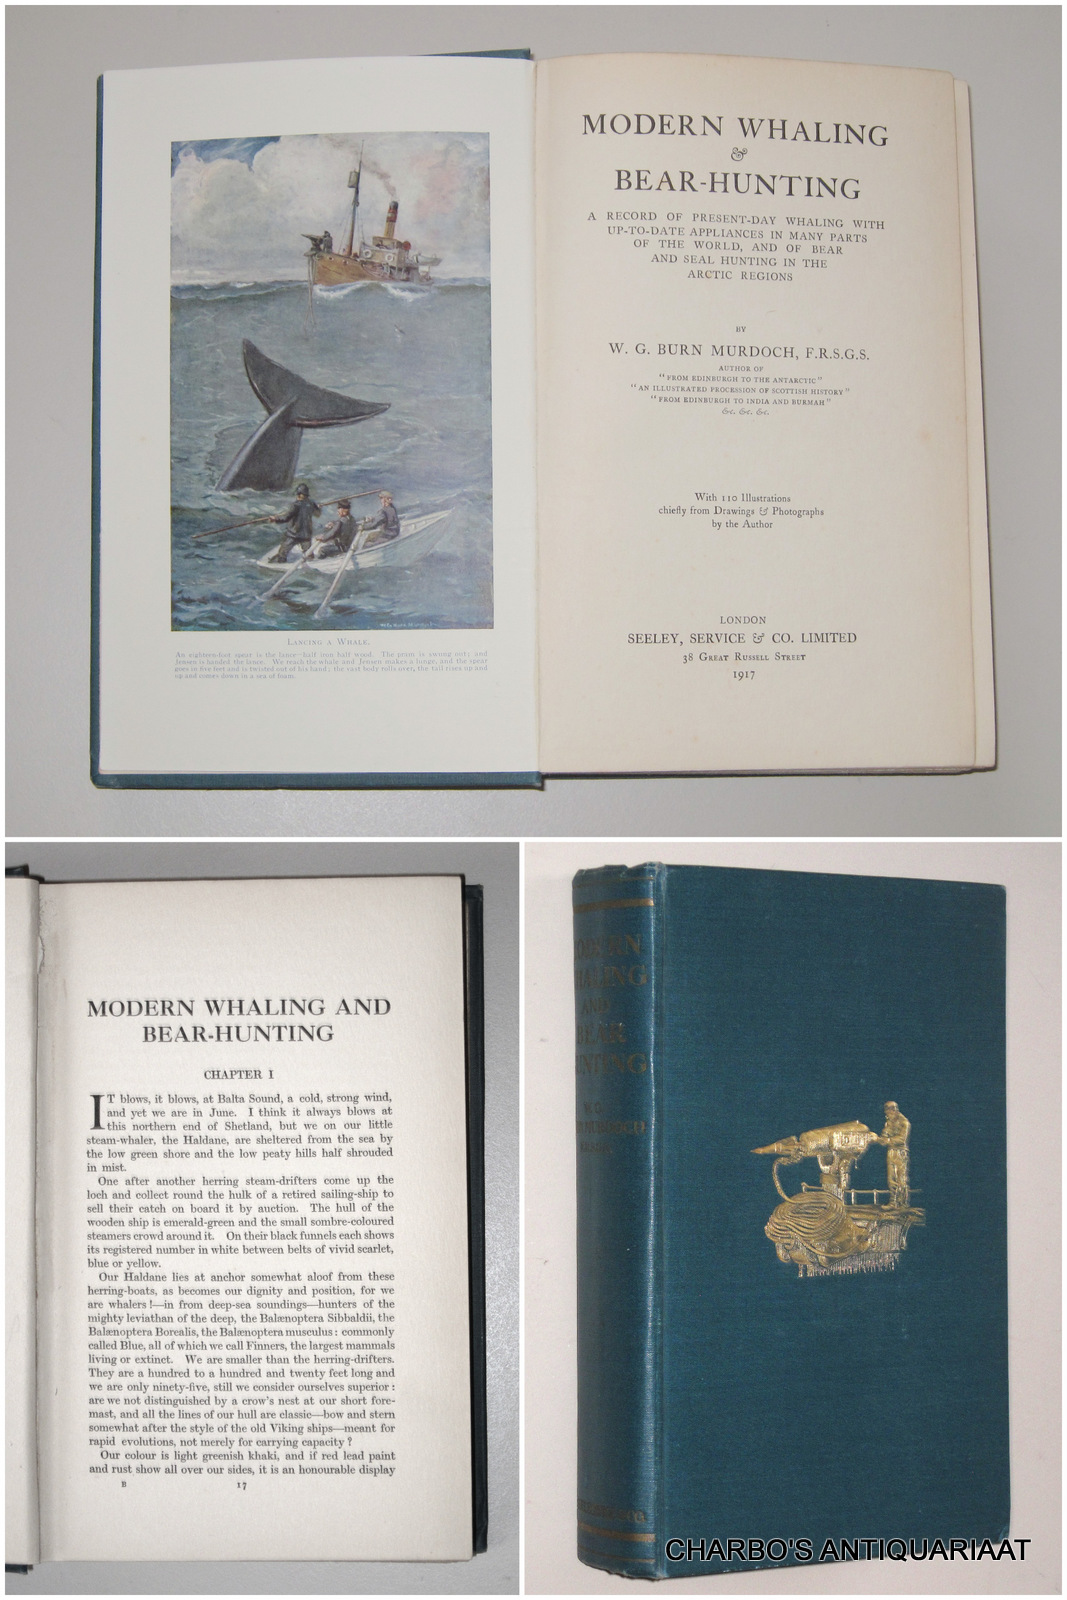 MURDOCH, W.G. BURN, -  Modern whaling & bear-hunting. A record of present-day whaling with up-to-date appliances in many parts of the world, and of bear and seal hunting in the Arctic regions.